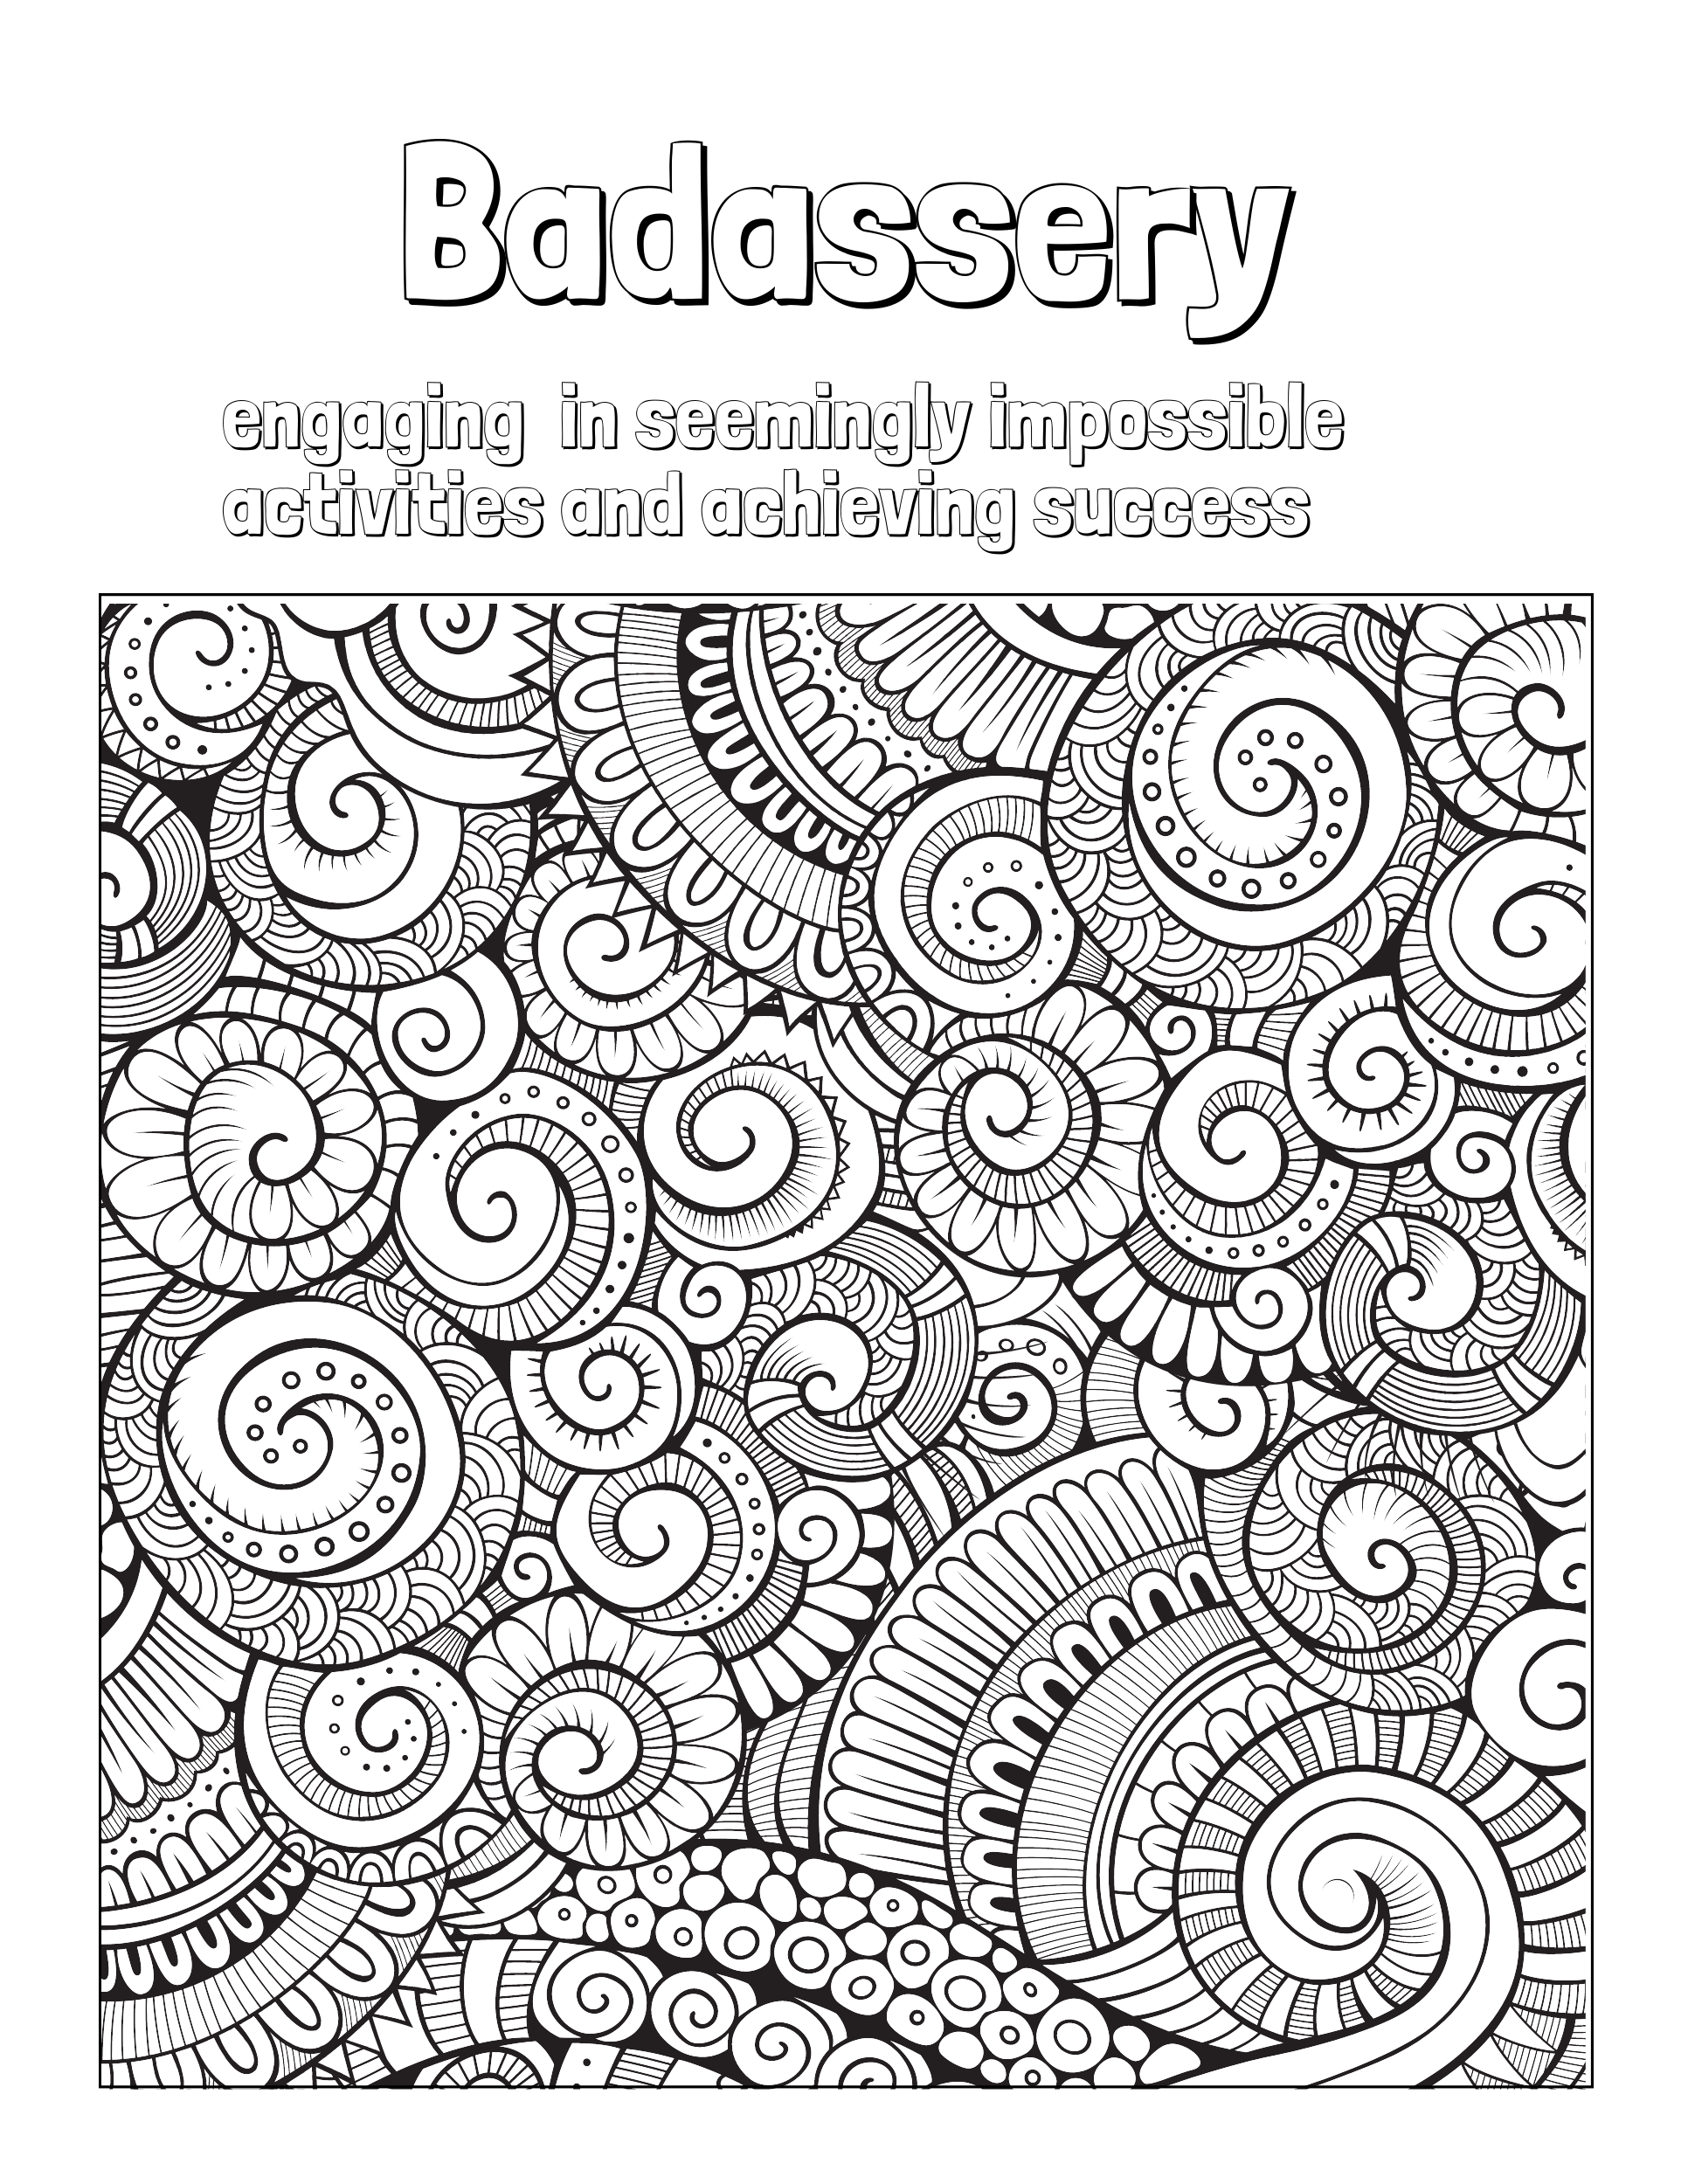 Swear word - Coloring Pages for Adults